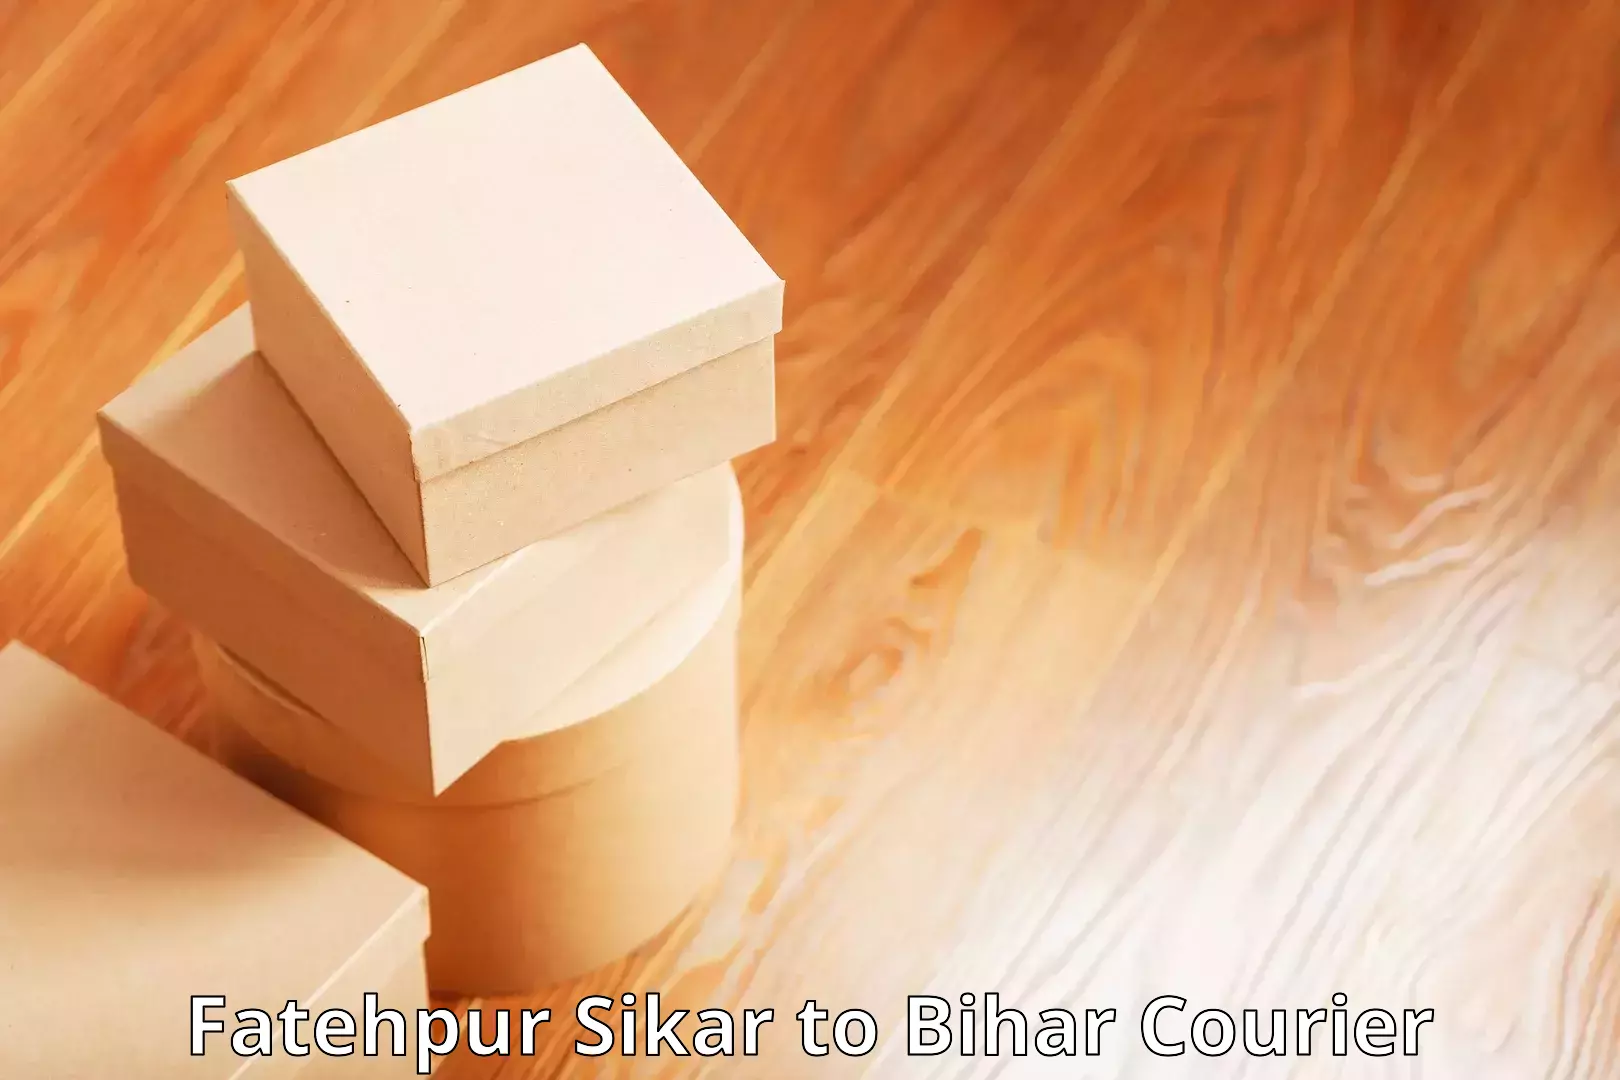 Business delivery service Fatehpur Sikar to Mahnar Bazar